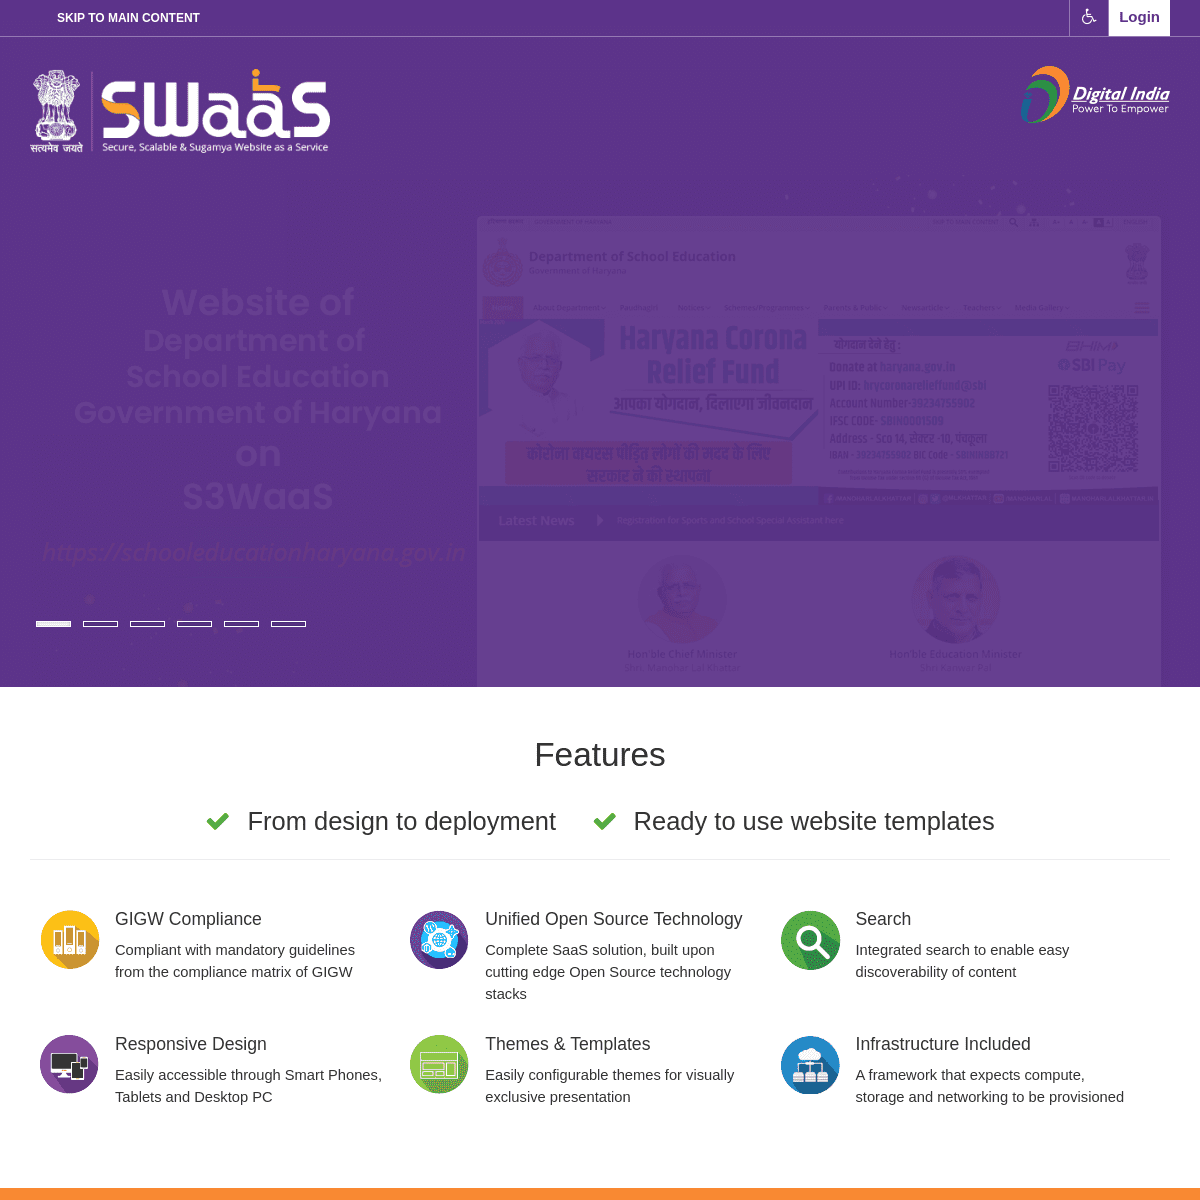 S3WaaS â€“ Secure, Scalable and Sugamya Website as a Service